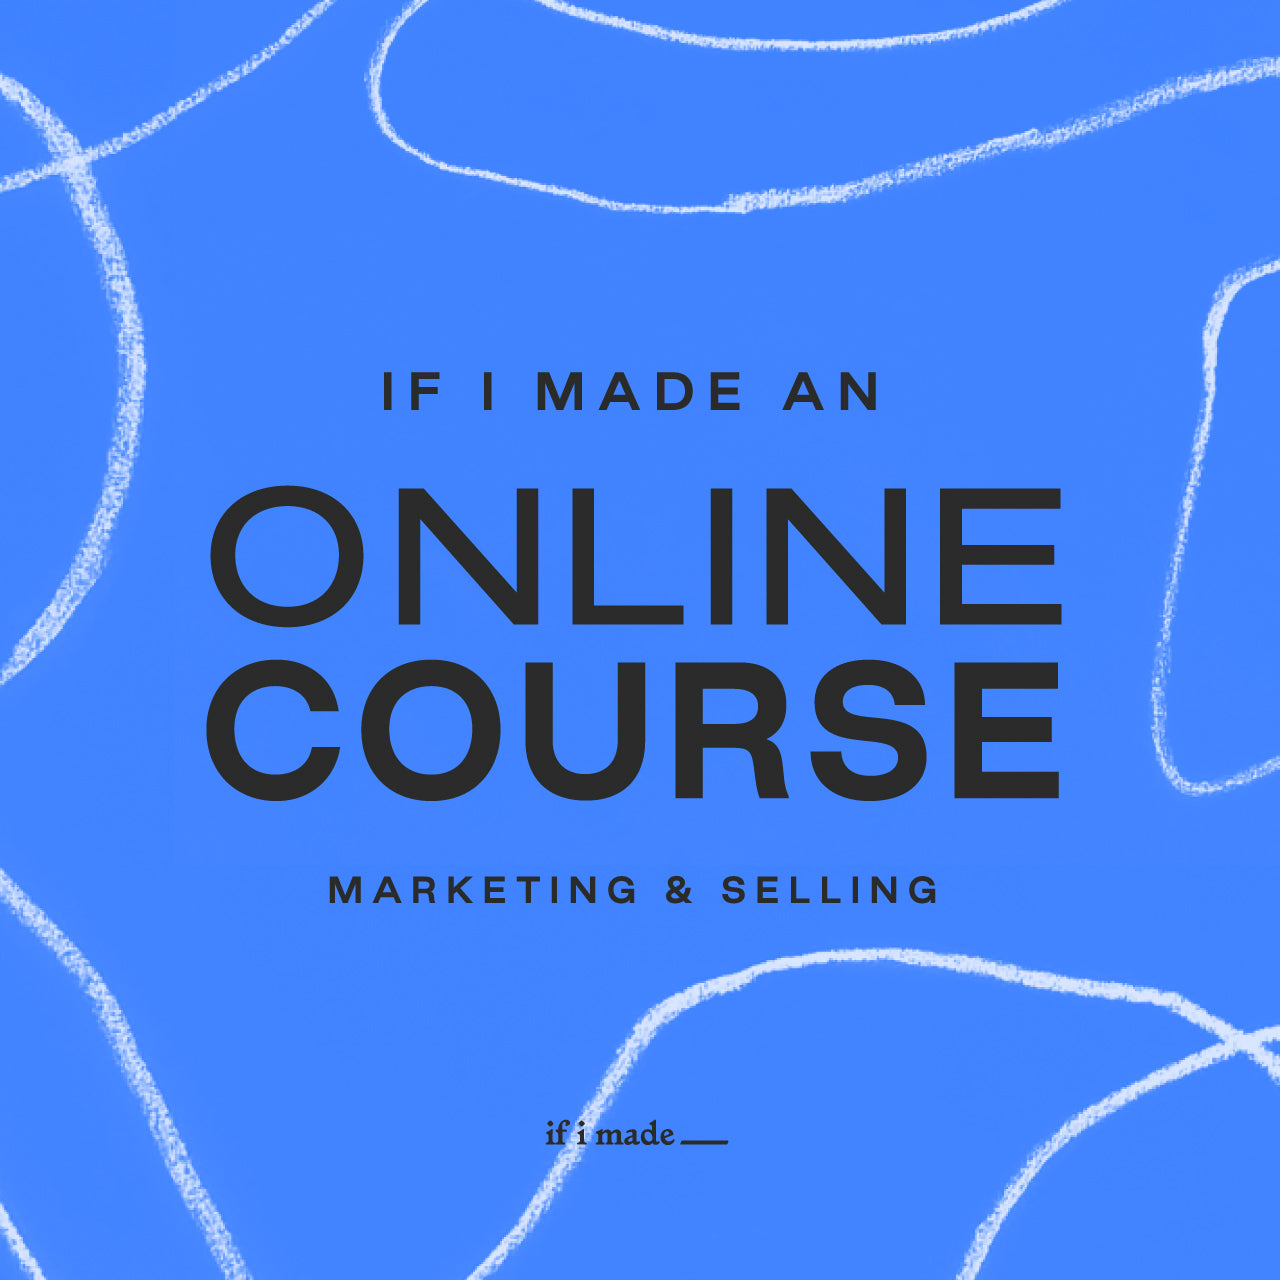 If I Made an Online Course: Marketing & Selling (SOP)